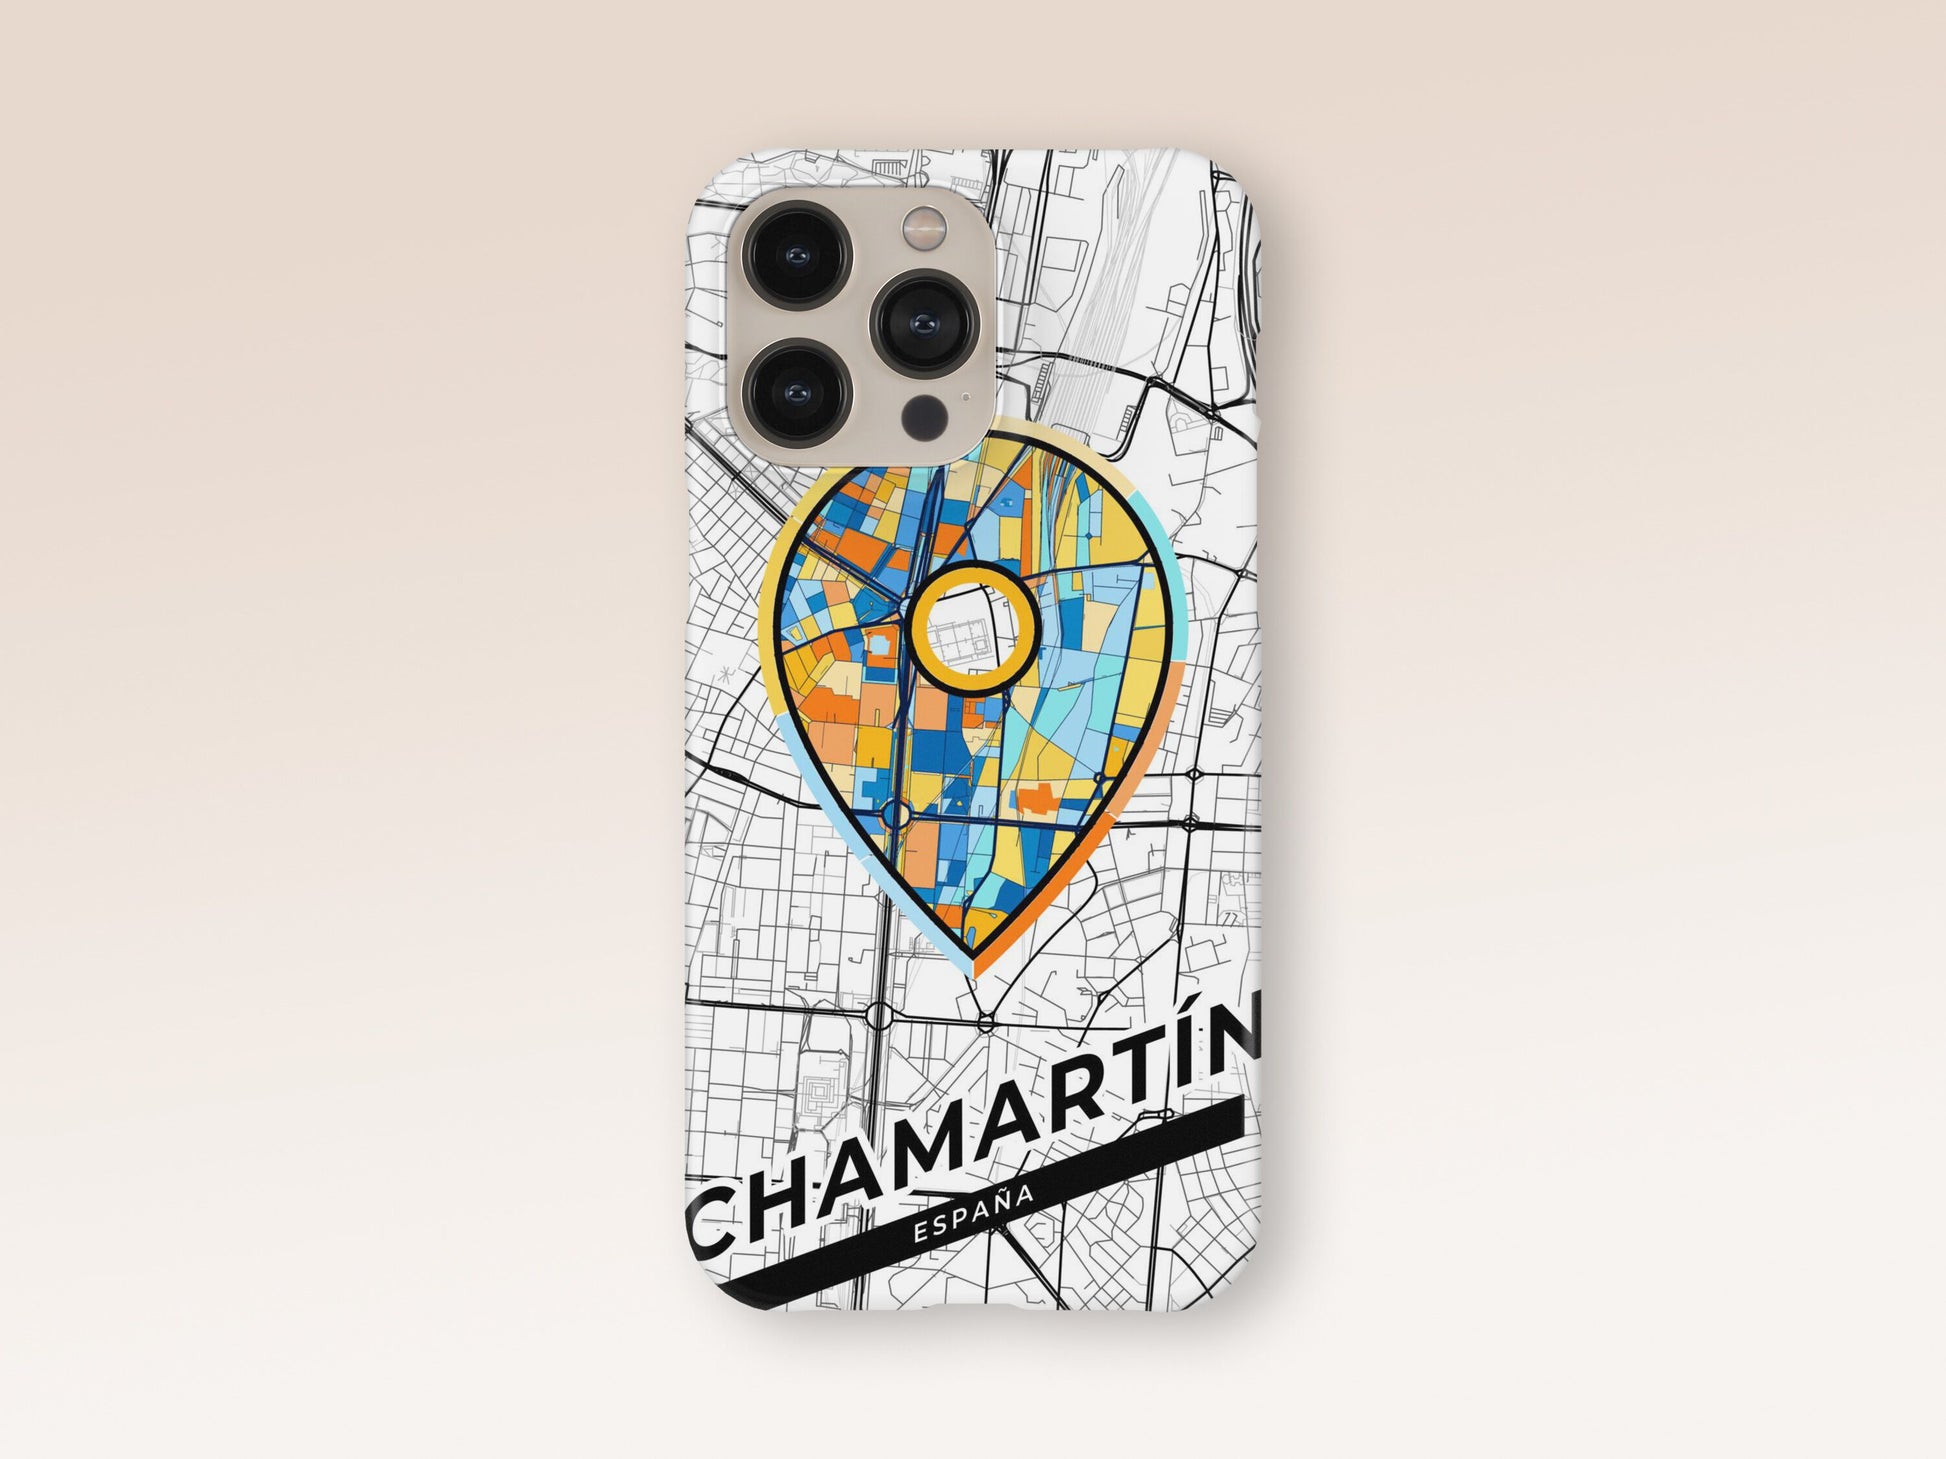 Chamartín Spain slim phone case with colorful icon. Birthday, wedding or housewarming gift. Couple match cases. 1